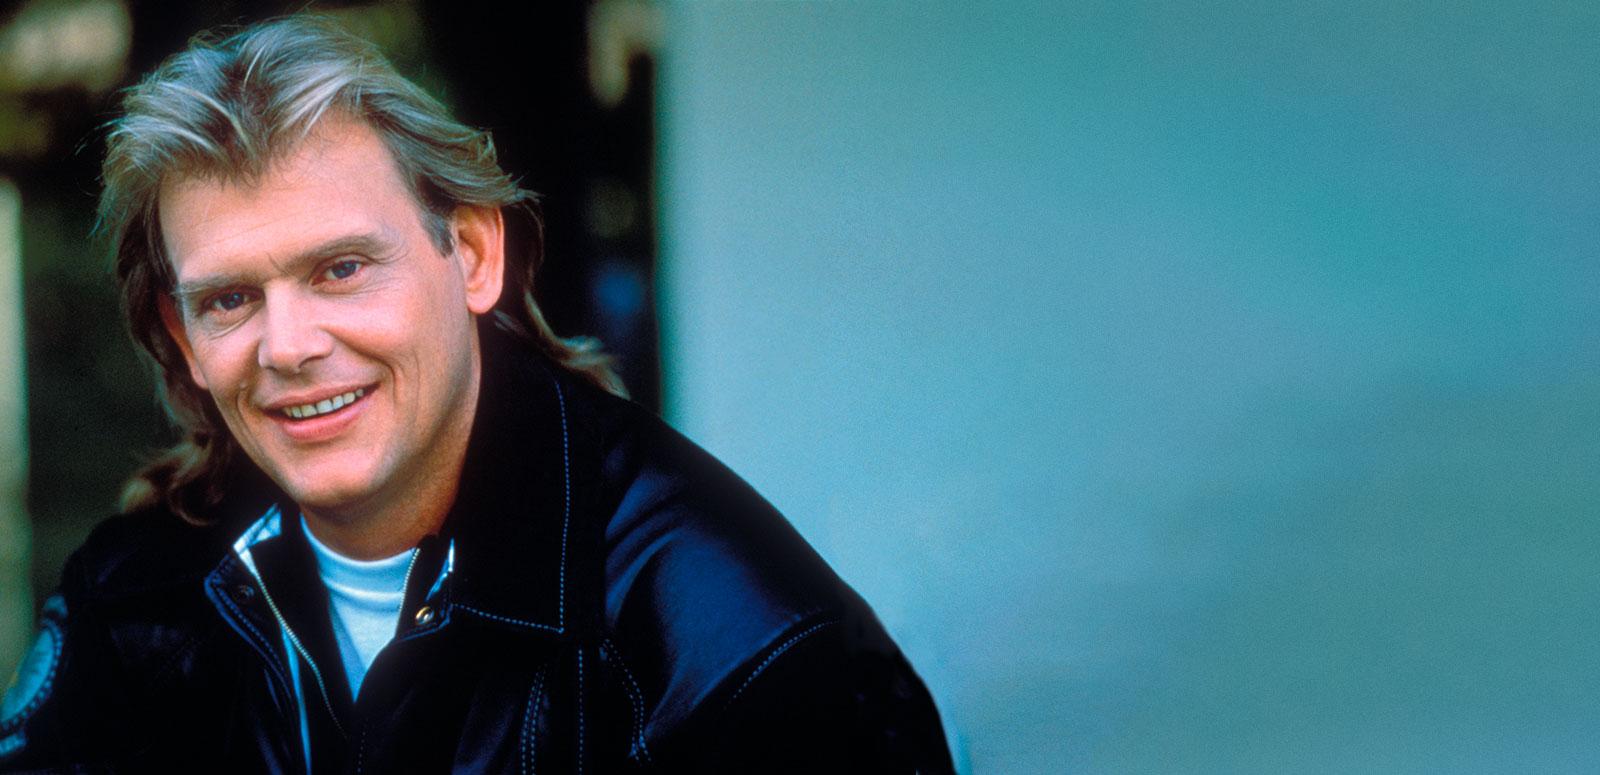 Singer John Farnham, circa late 1980s wearing a black jacket, pictured from the shoulders up. He has his head tilted slightly towards the camera and is smiling.